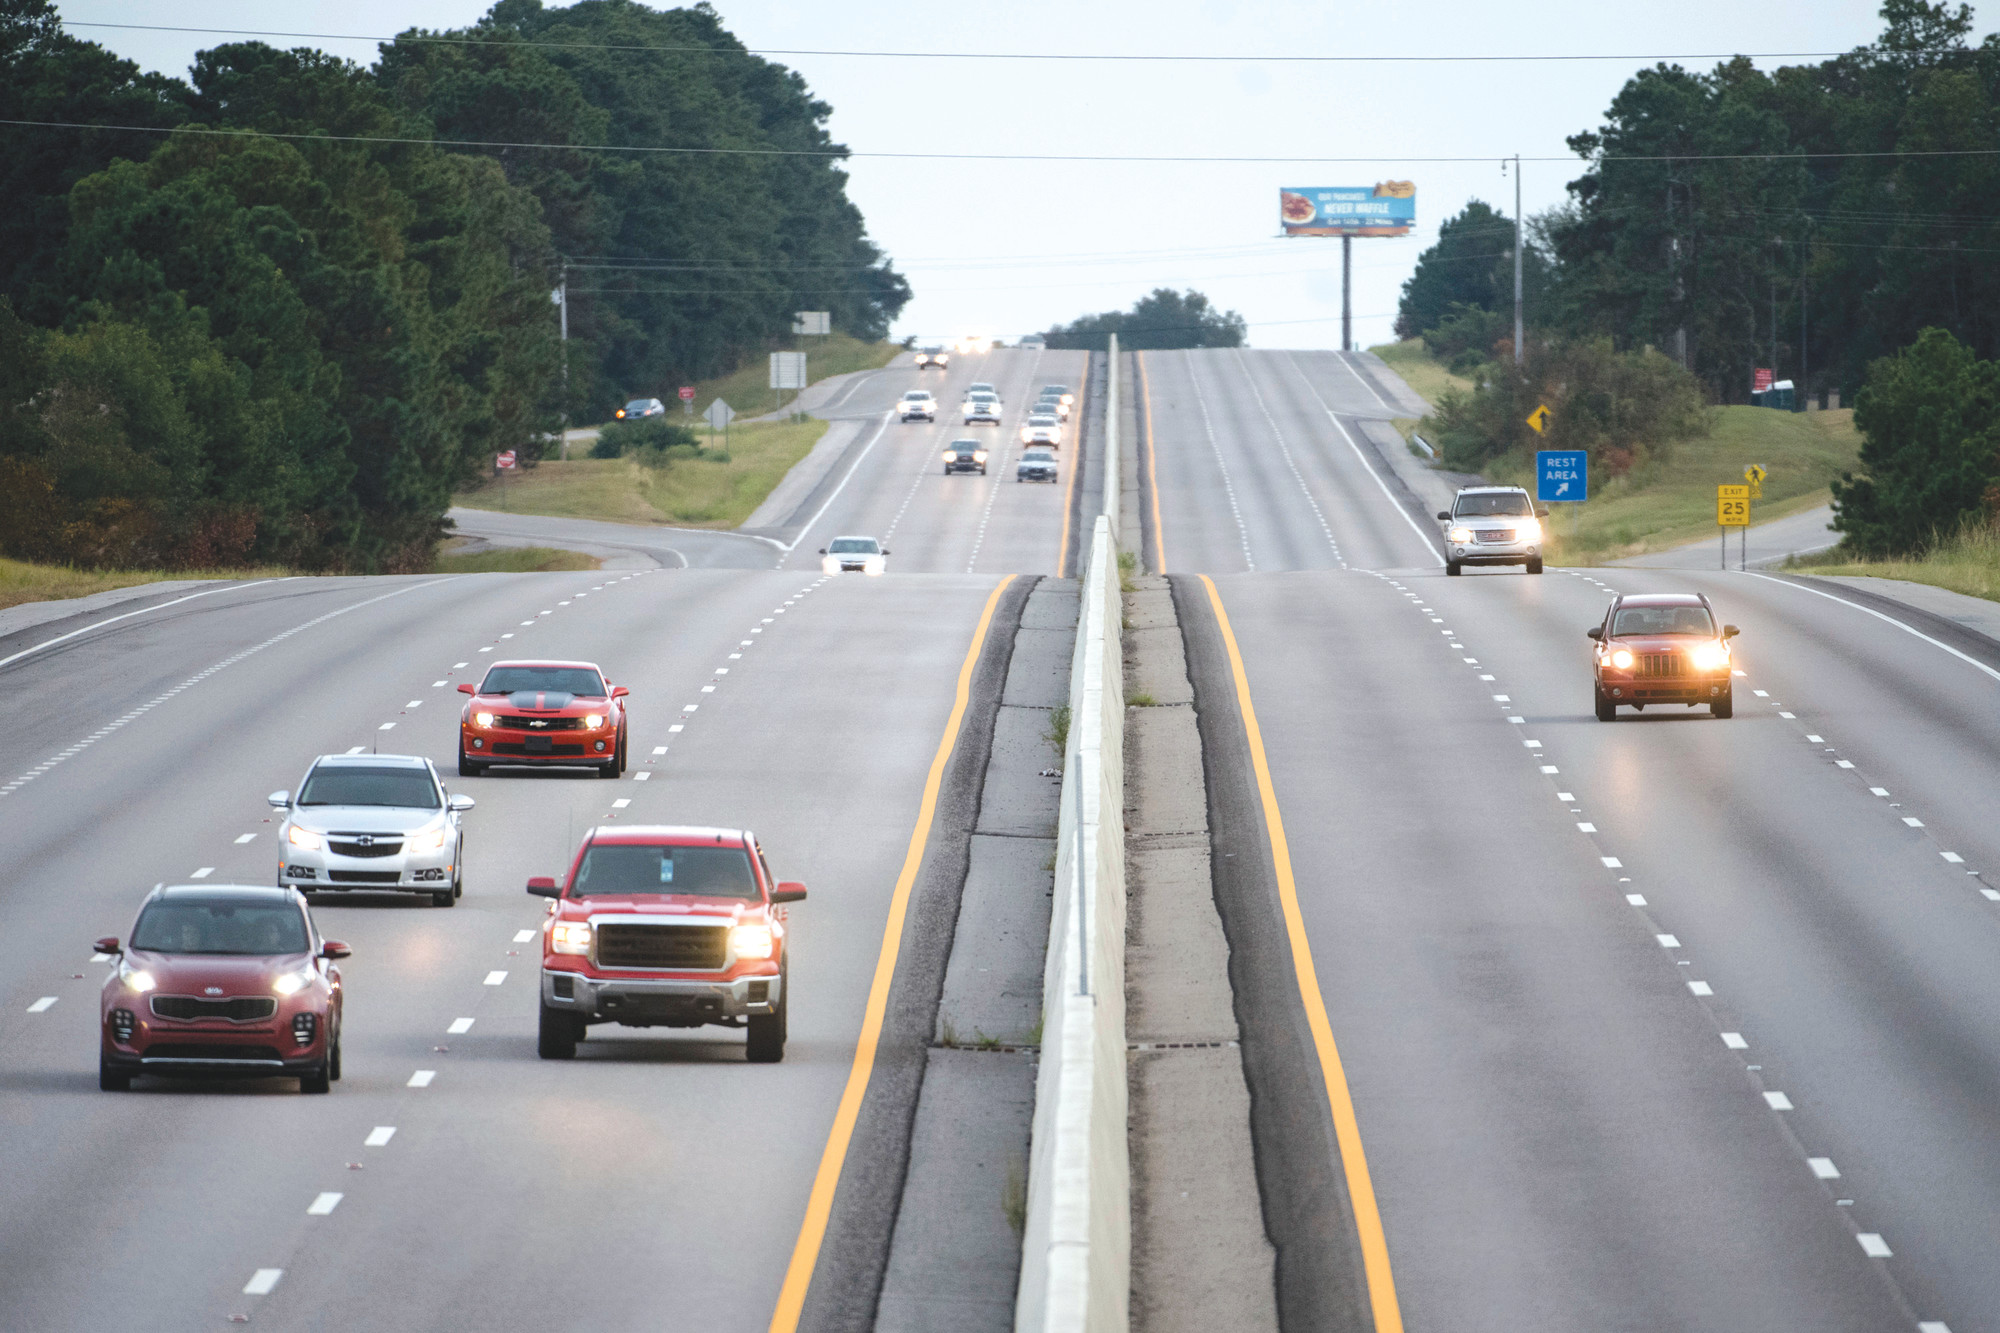 Traffic moves west on all lanes of Interstate 26 on Tuesday in Columbia. A lane reversal was implemented earlier in the day, utilizing all lanes for travel west between Charleston and Columbia in anticipation of the arrival of Hurricane Florence.